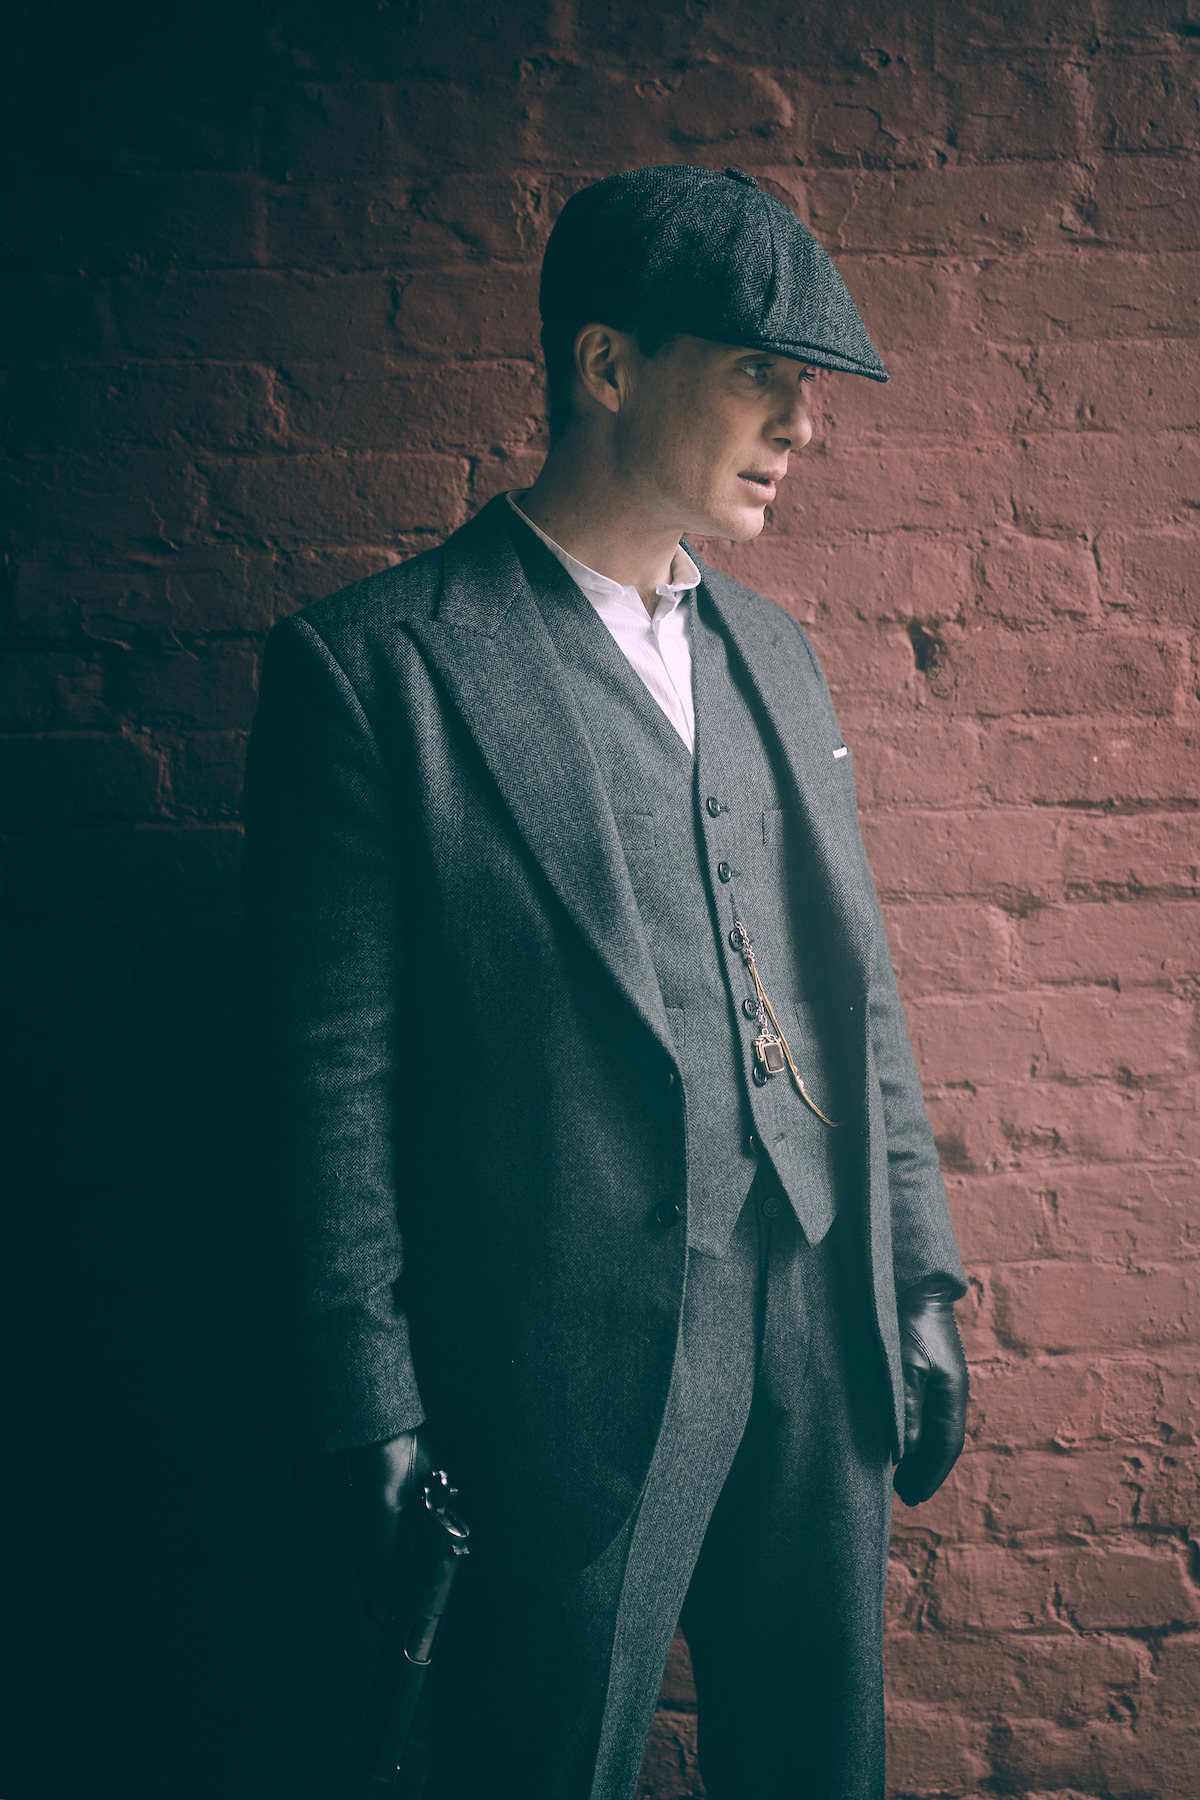 How history influenced the Peaky Blinders style